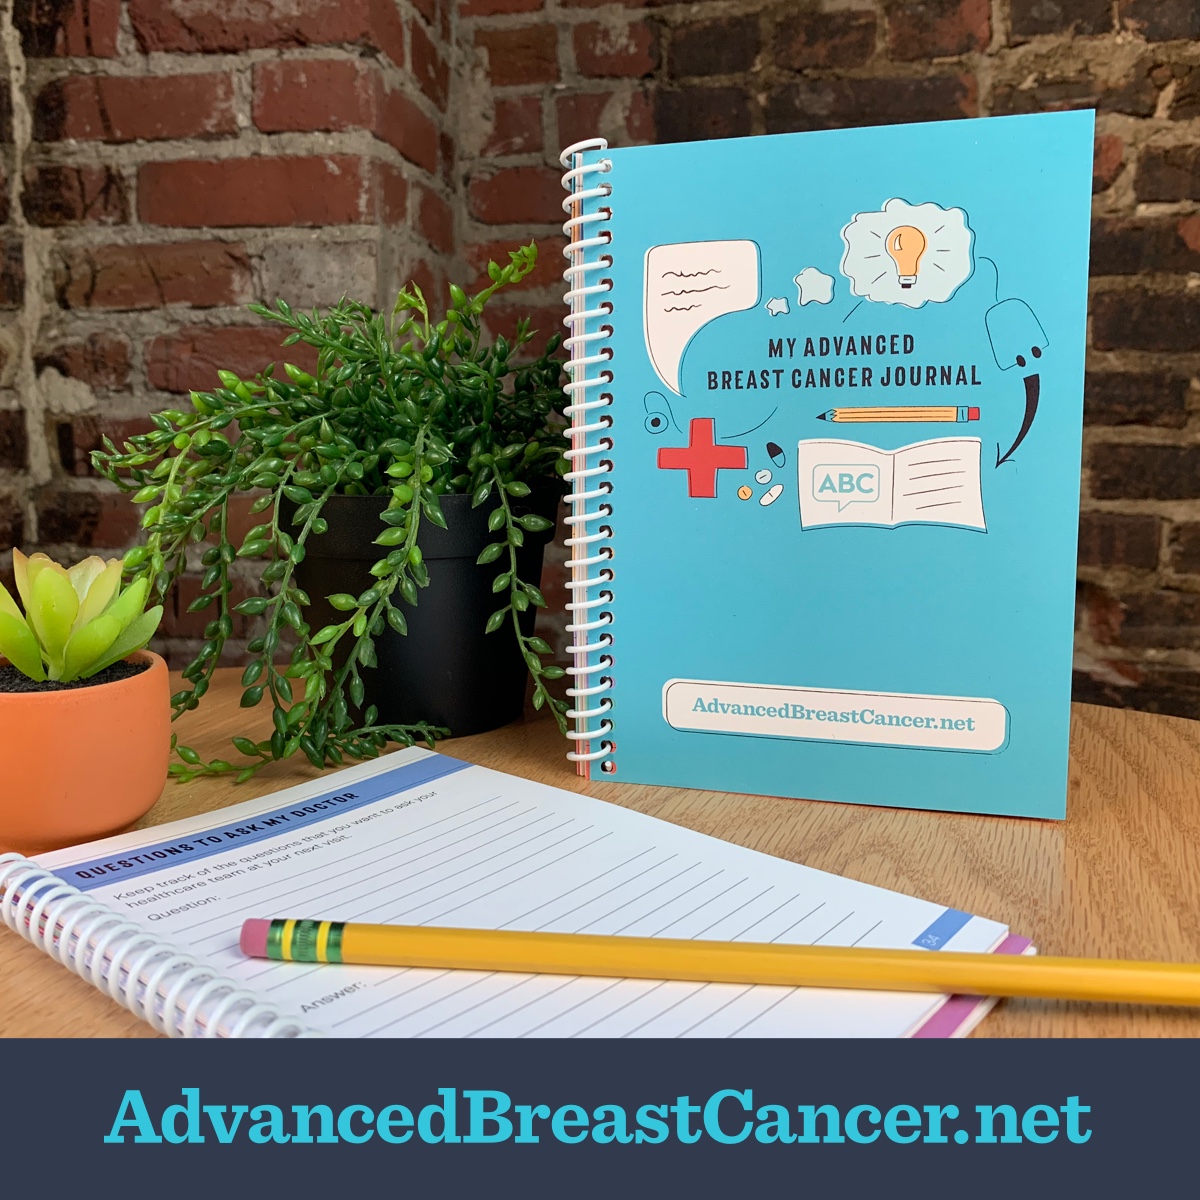 My Advanced Breast Cancer Journal